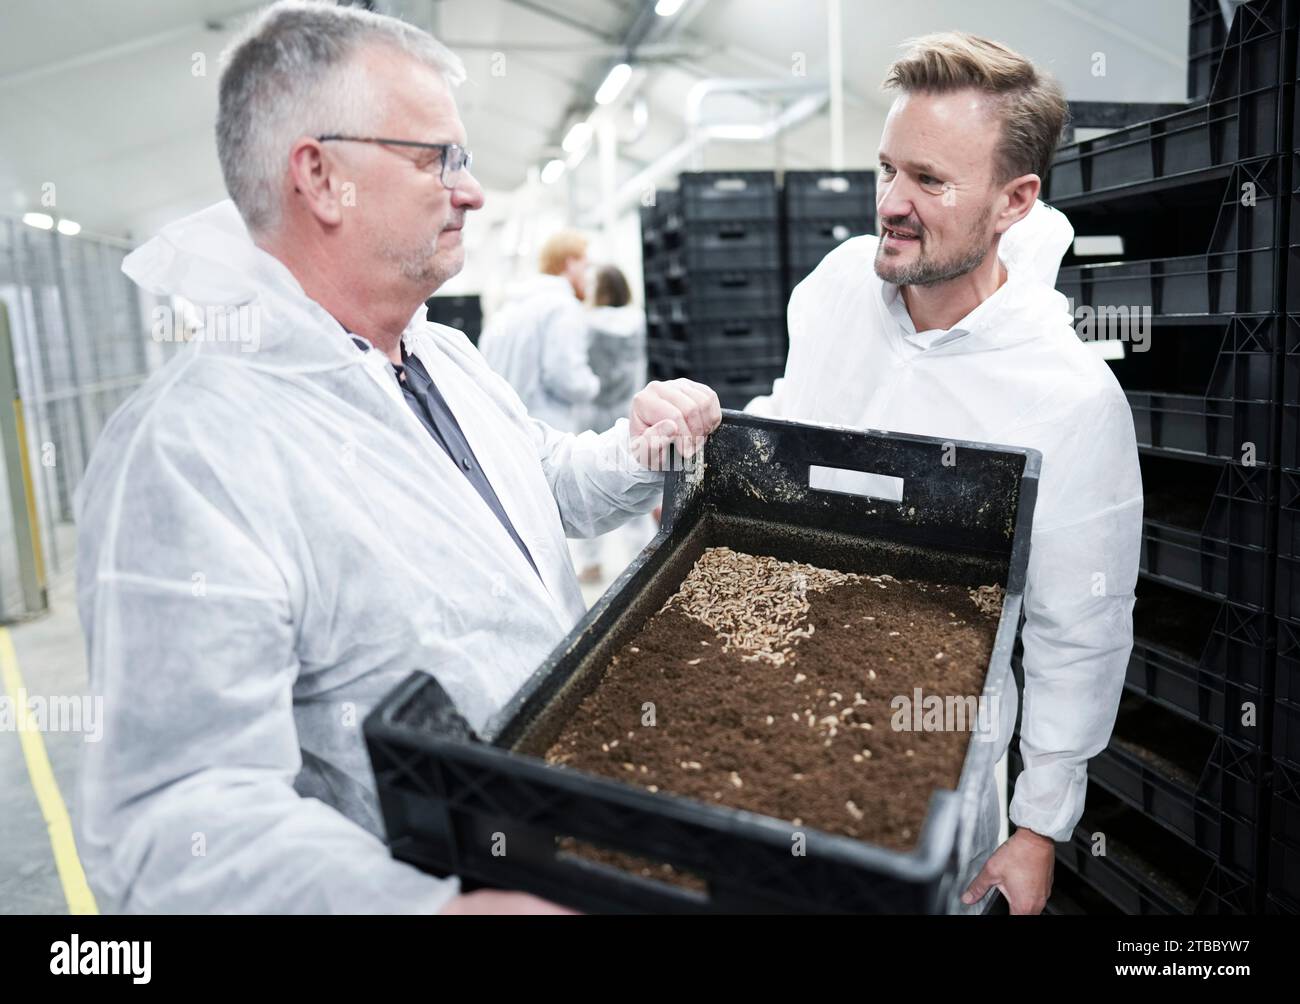 Enorm Biofactory Carsten Lind Pedersen(left) CEO and Jakob Lave - director DLG. Northern Europe's largest insect factory - Enorm Biofactory, which will produce 100 tons of larvae per day for climate-friendly animal feed in Flemming Denmark on Wednesday 29 November 2023. Millions of swarming larvae from the large tropical soldier fly will in future become sustainable Danish feed for fish and poultry. Northern Europe's largest fully automated insect factory Enorm officially opens on Wednesday December 6th in the small village of Flemming west of Horsens. This spring, production will increase to Stock Photo